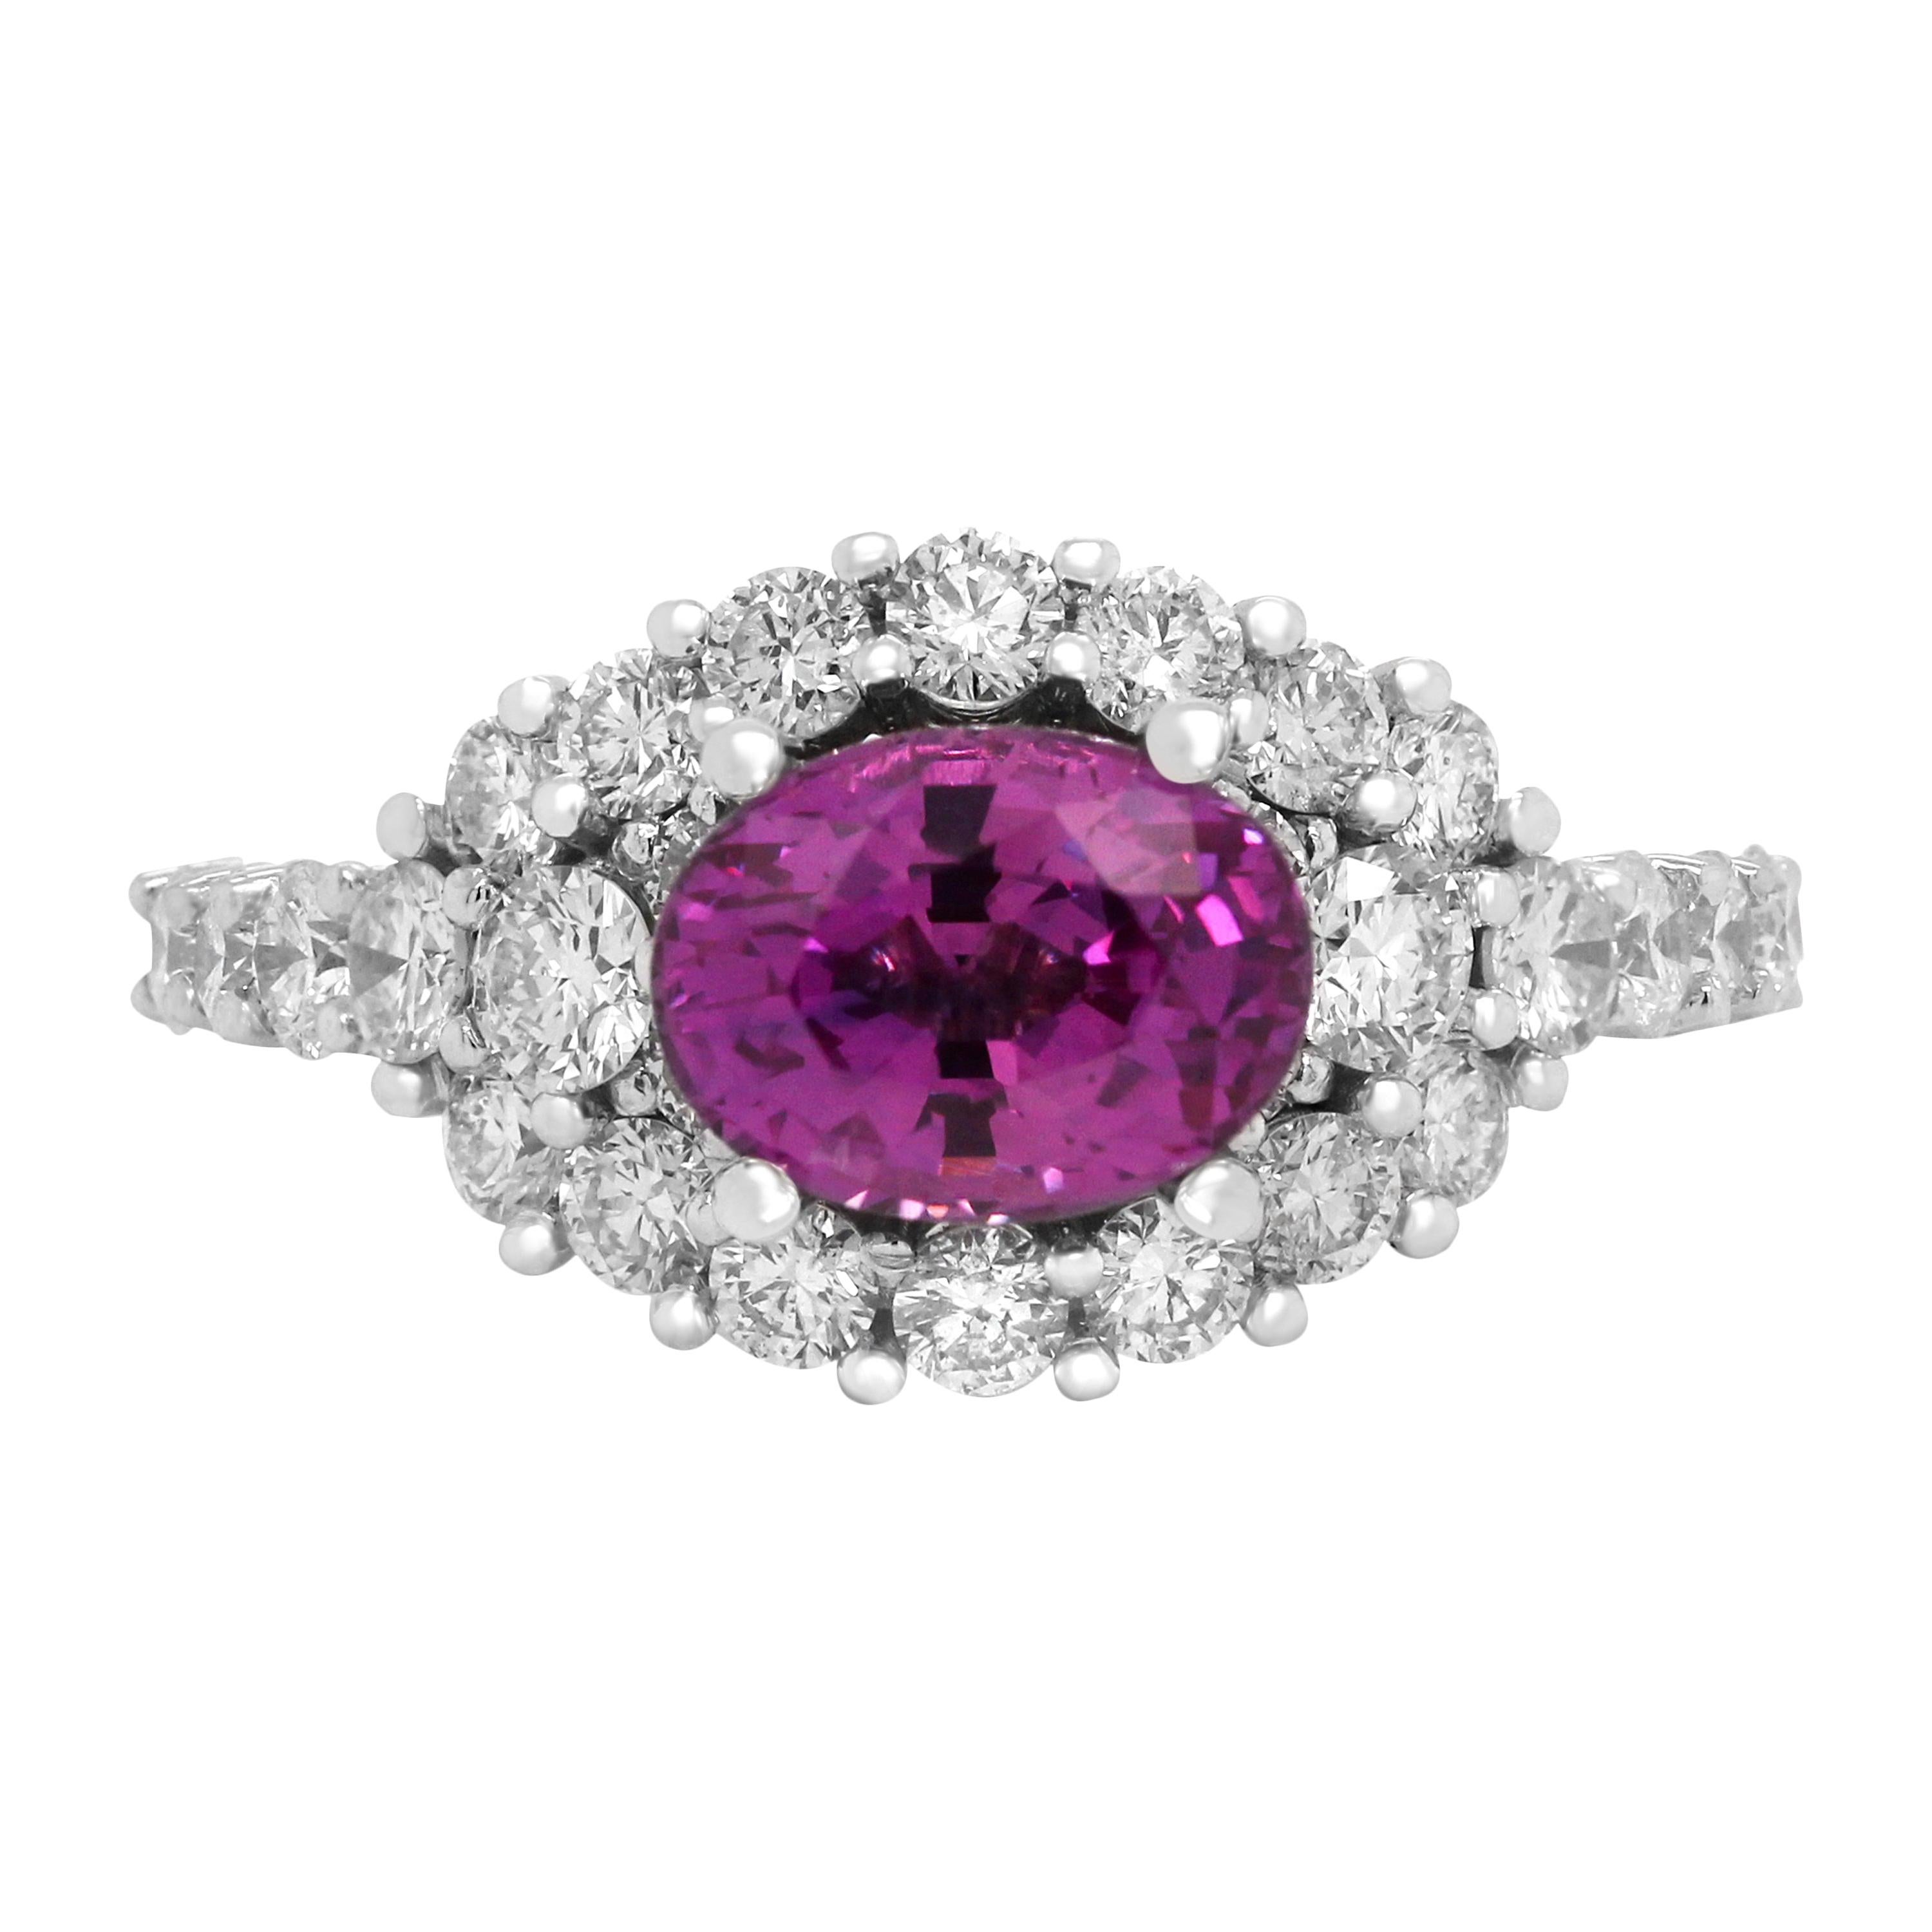 2.02 Carat Oval Bubble Gum Pink Sapphire 14k White Gold Diamond Cocktail Ring For Sale